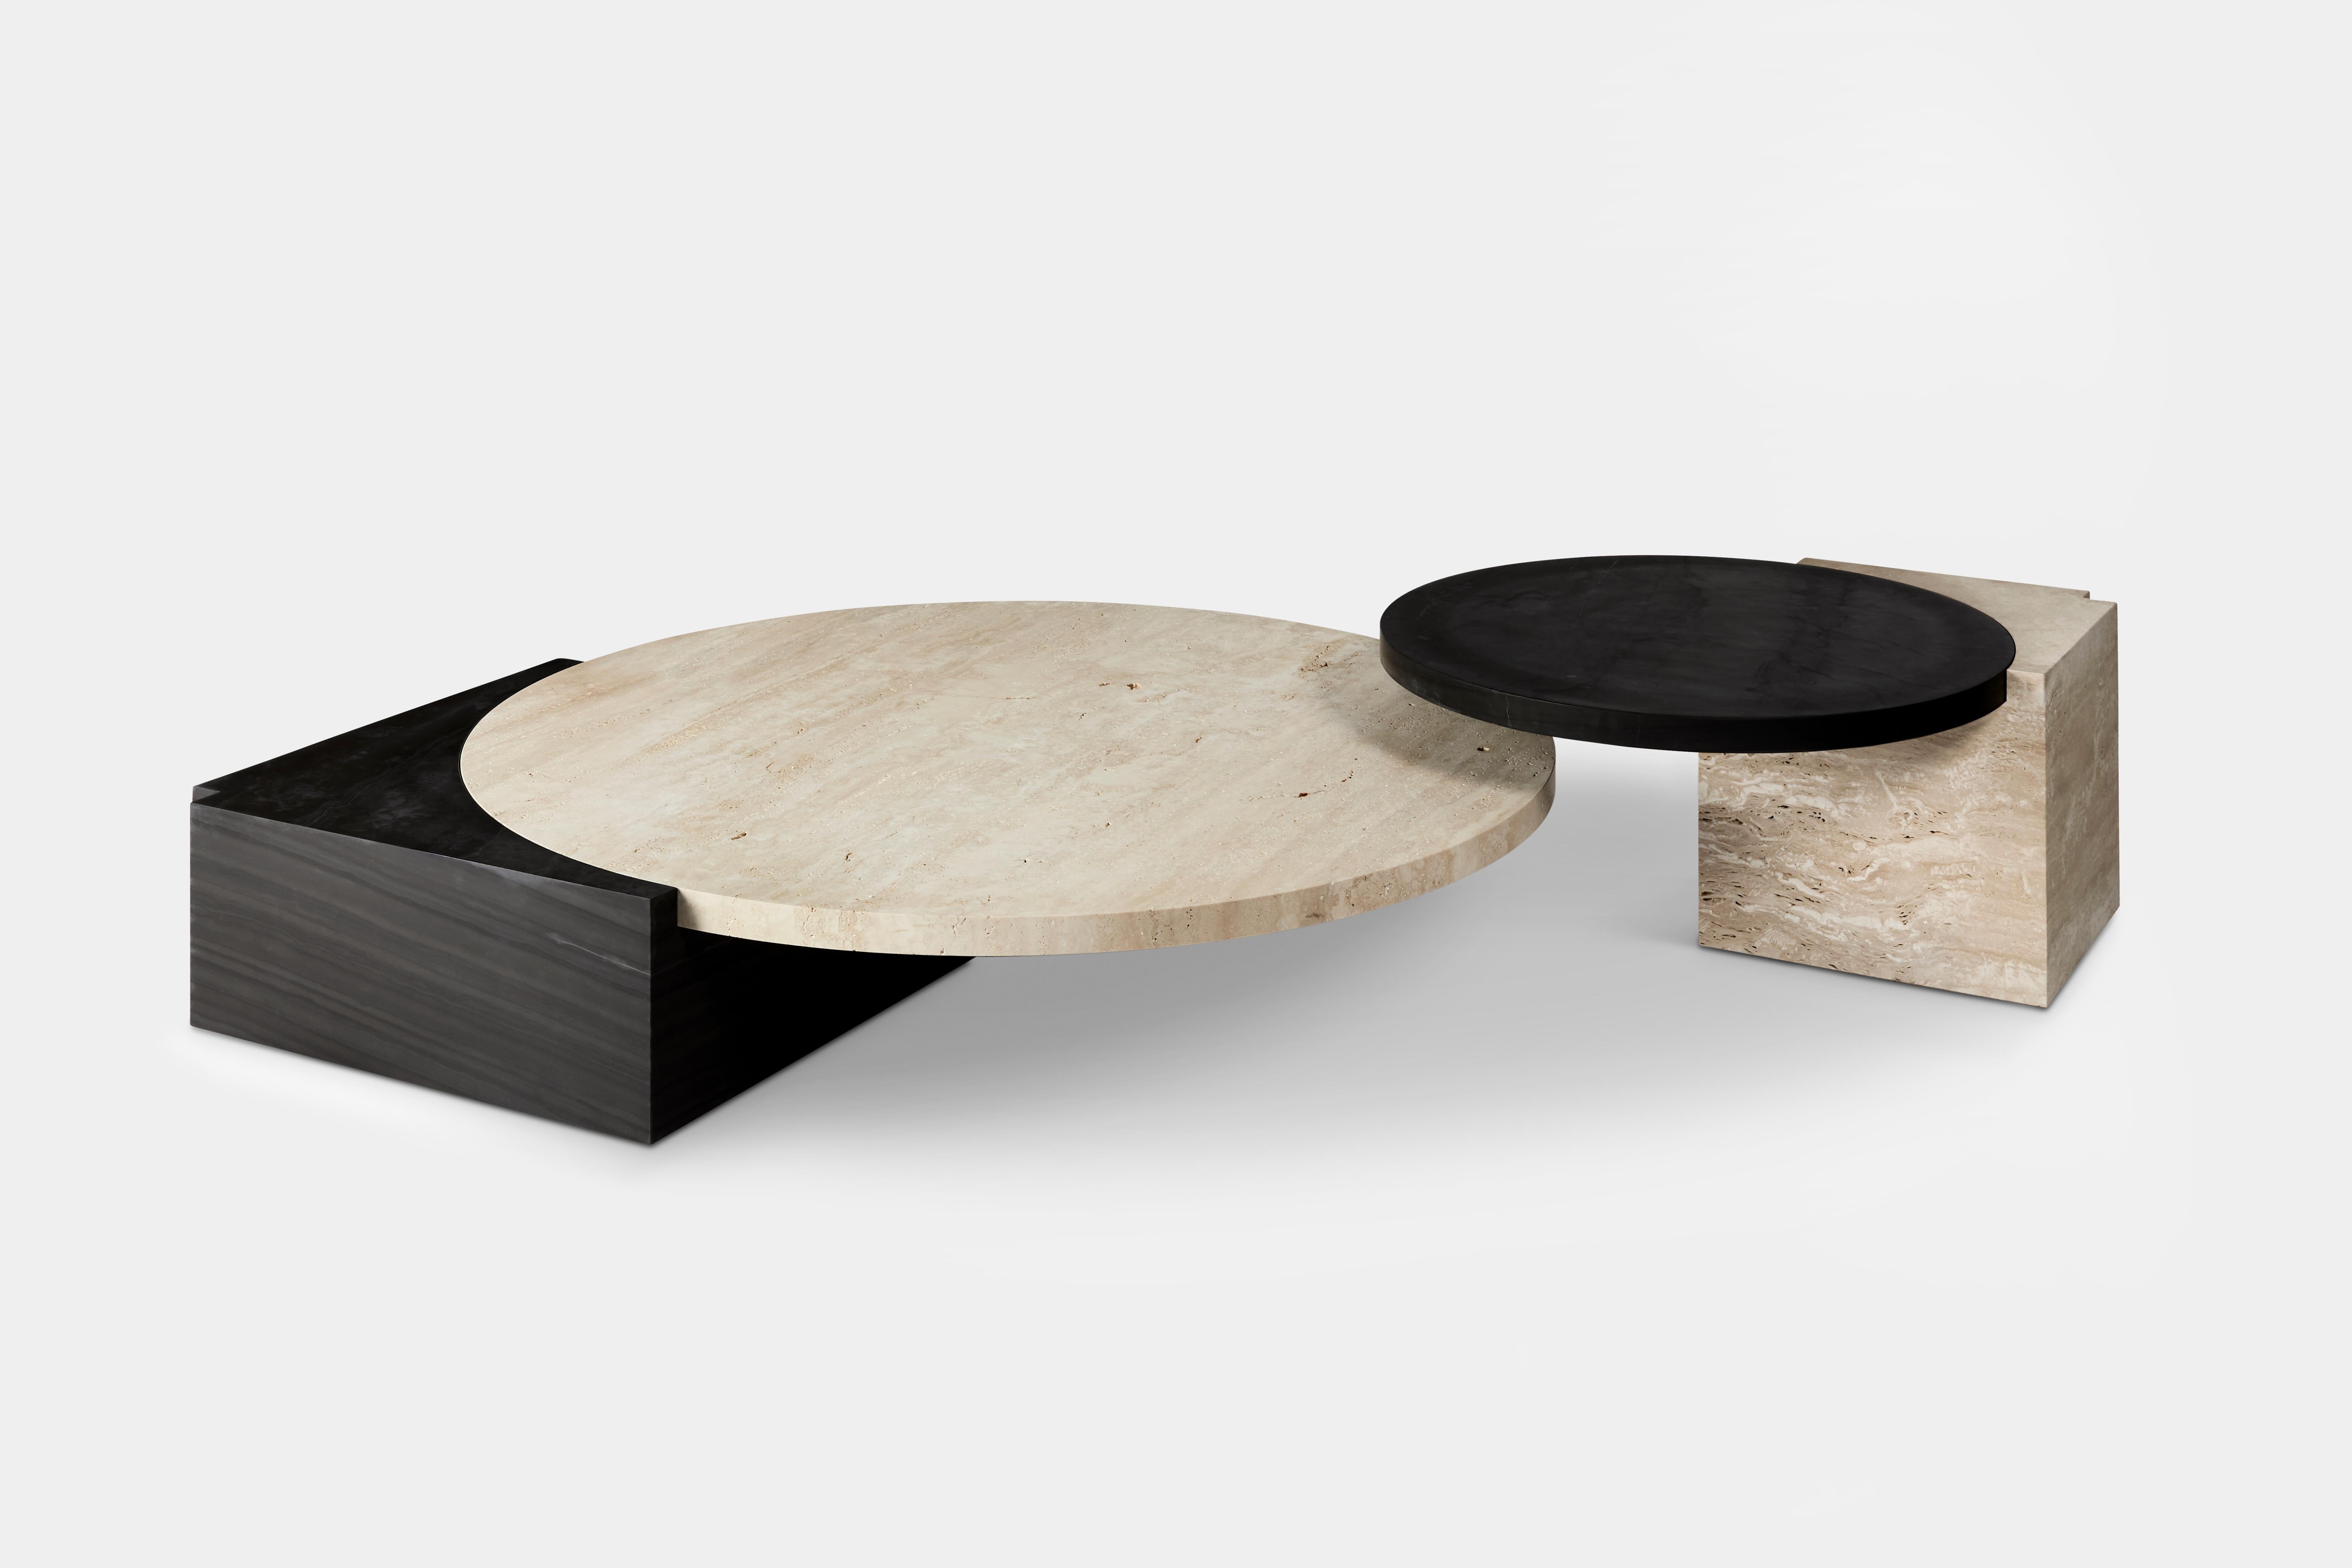 The Tribeca Tables are a series of sculptural side and coffee tables, which mirror the same floating concept as the sofa, appearing to defy gravity. 

Crafted in black silk marble and travertine with a stepped detail that reflects the soaring local